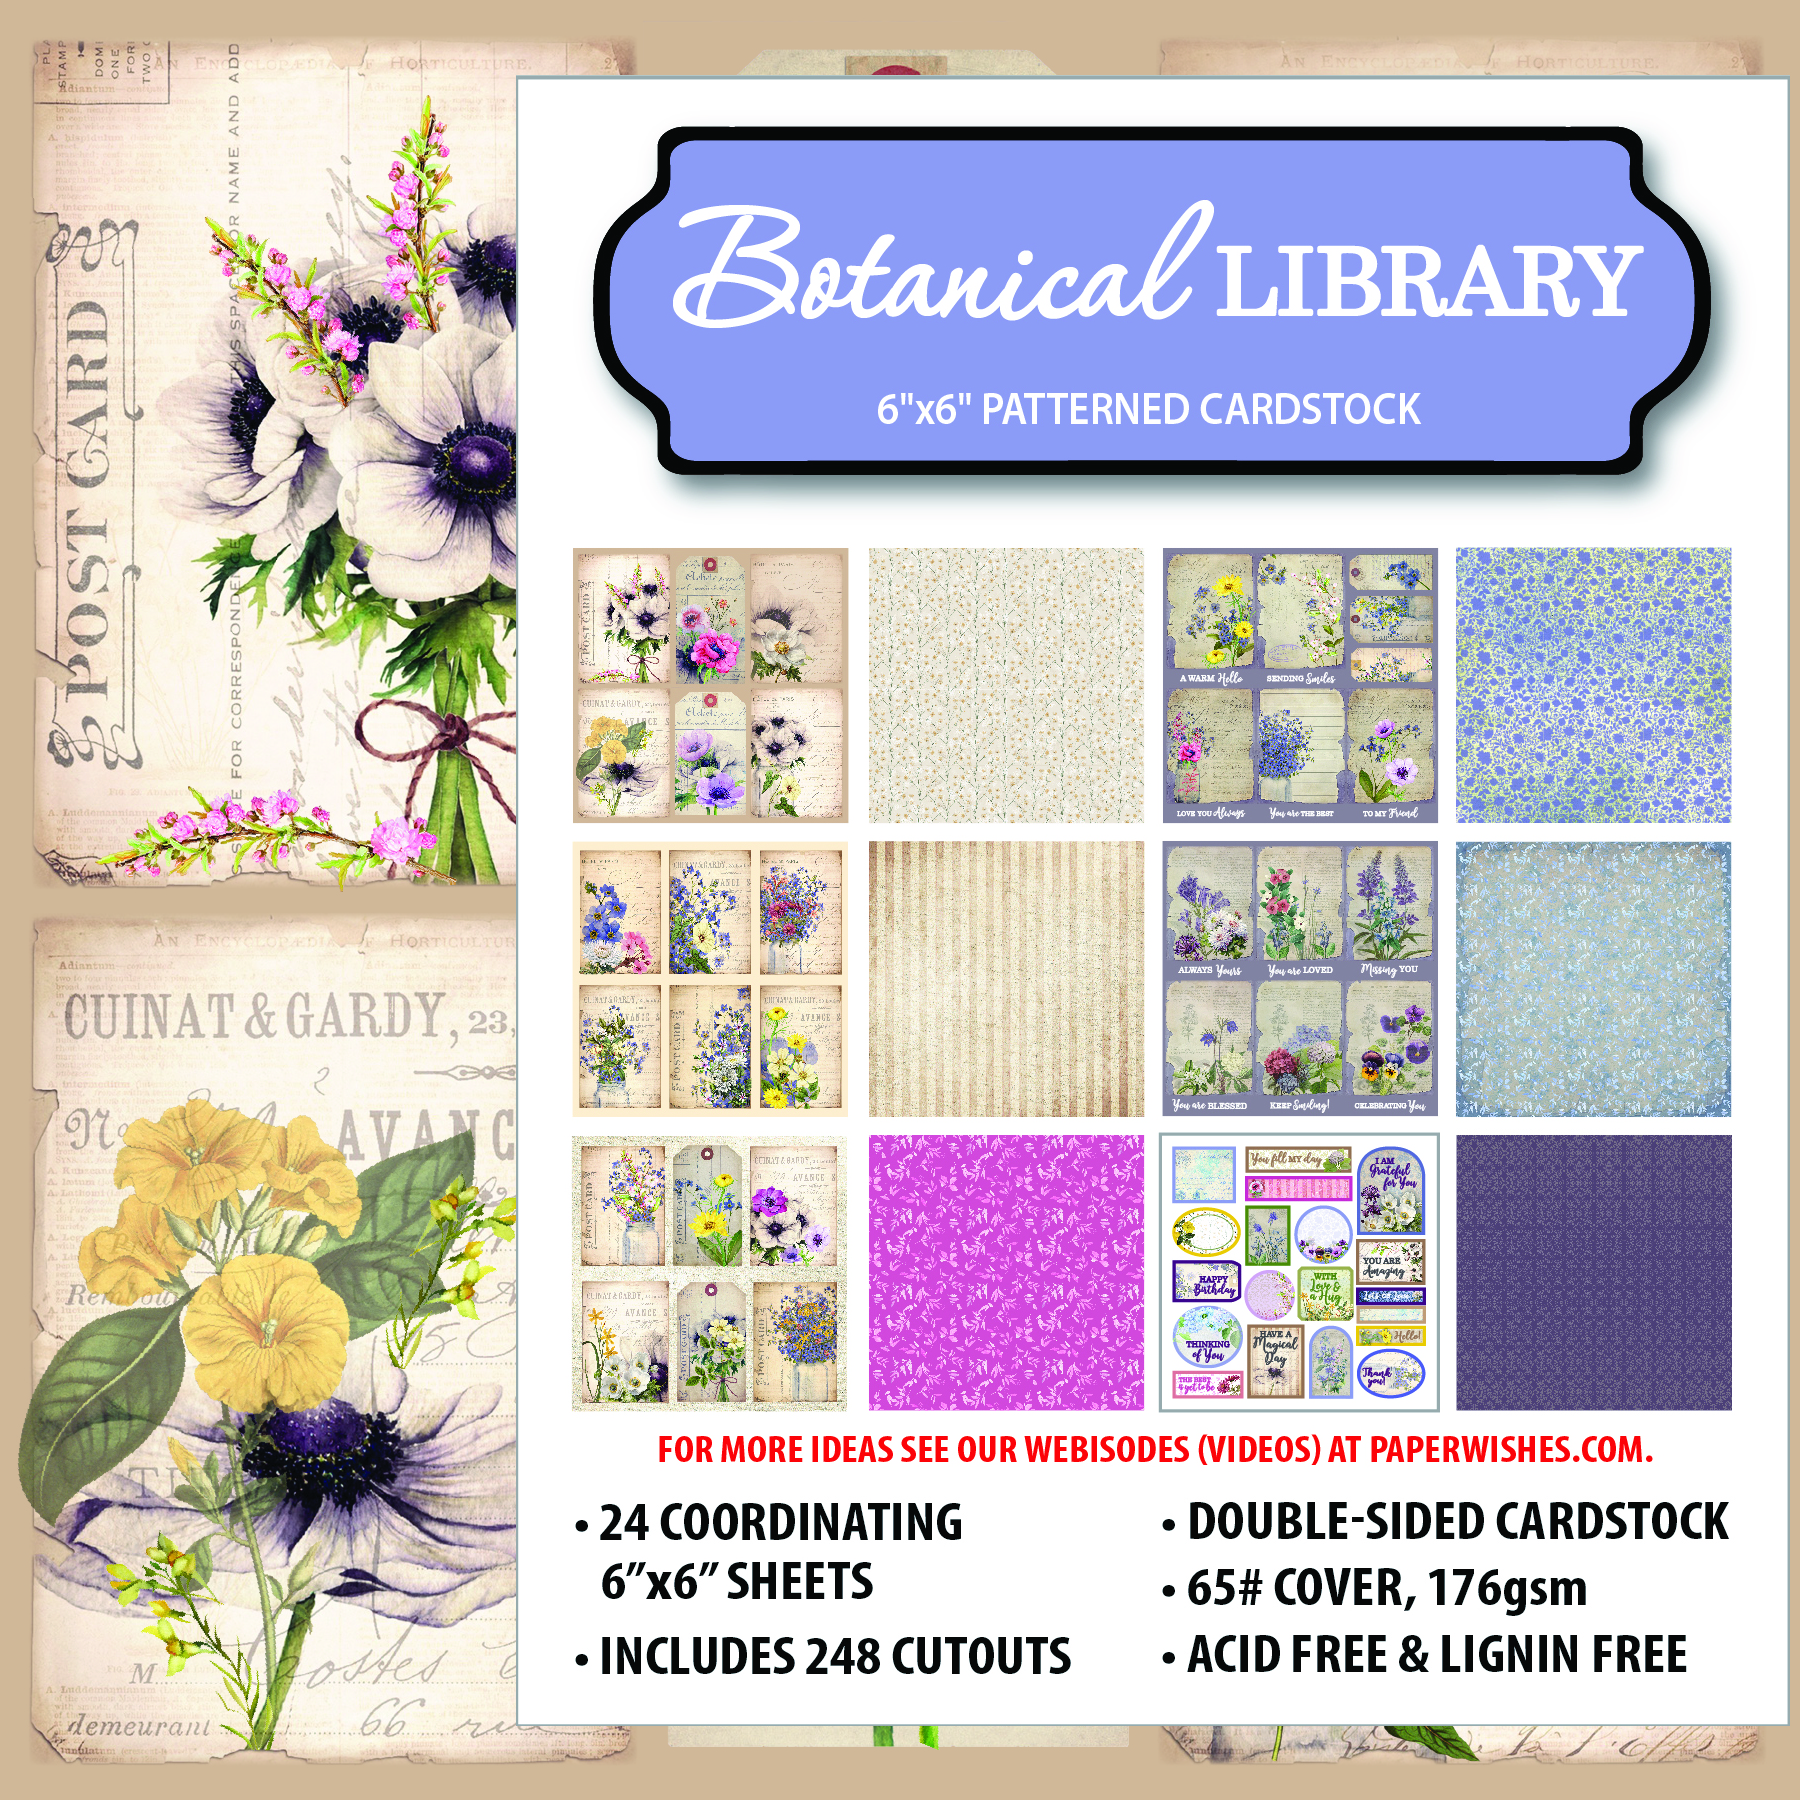 Botanical Library 6x6 Patterned Cardstock